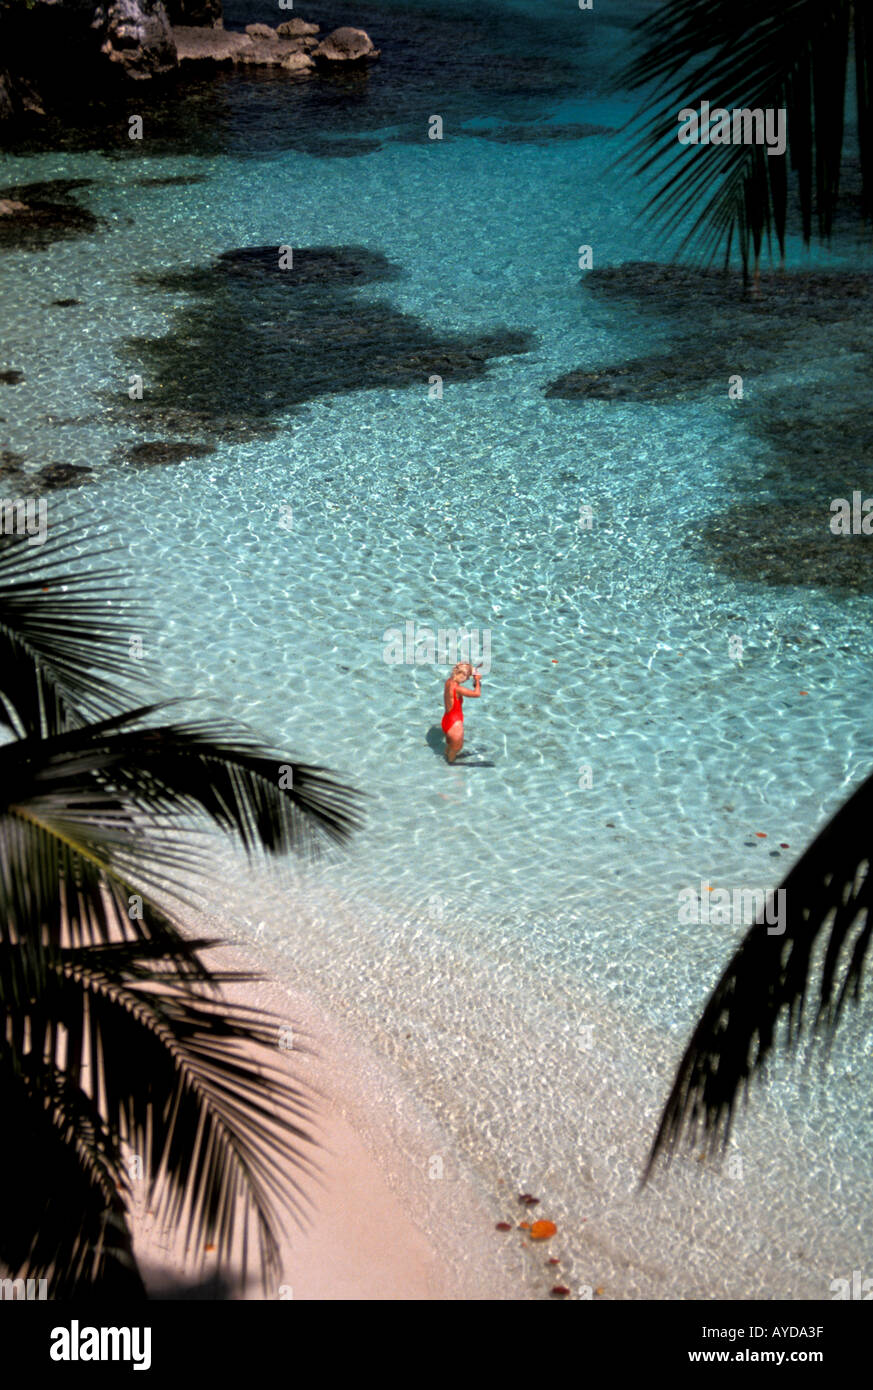 Woman snorkeler wearing red bathing suit in remote tropical cove Jamaica north shore in Caribbean Stock Photo